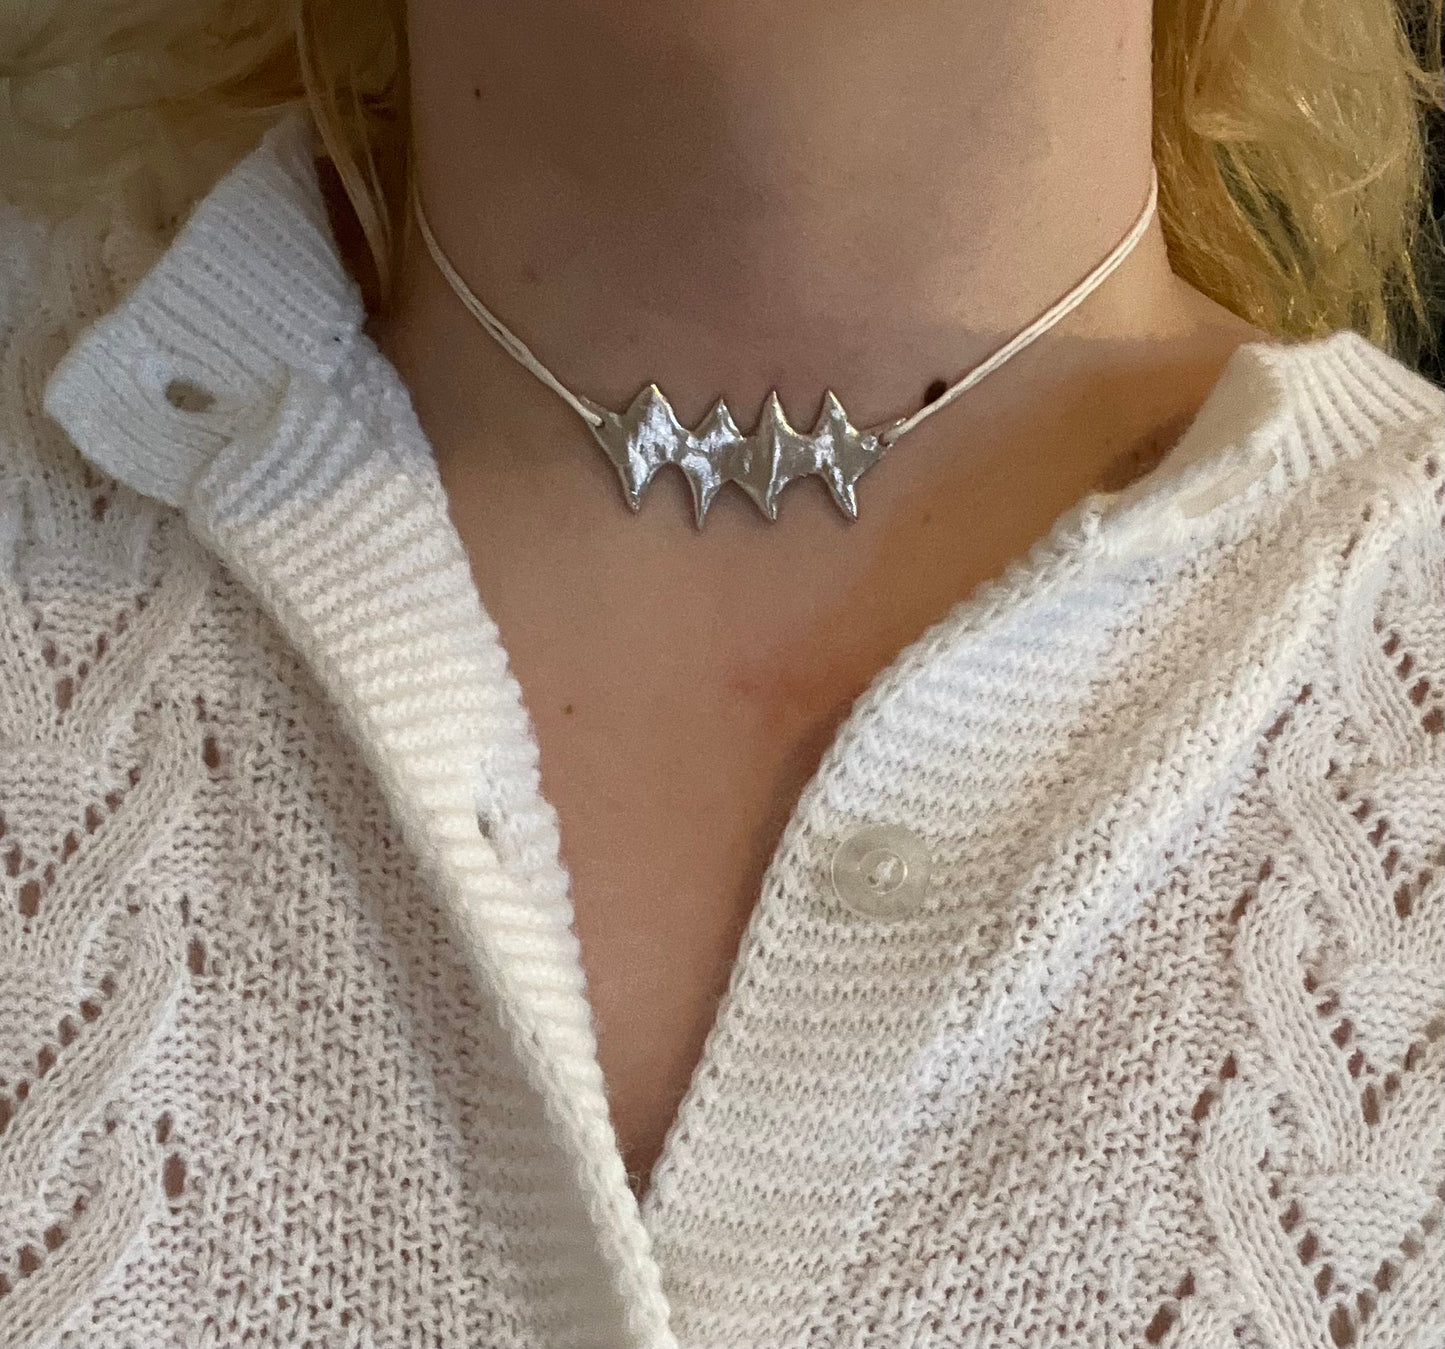 The Barbed Wire Choker